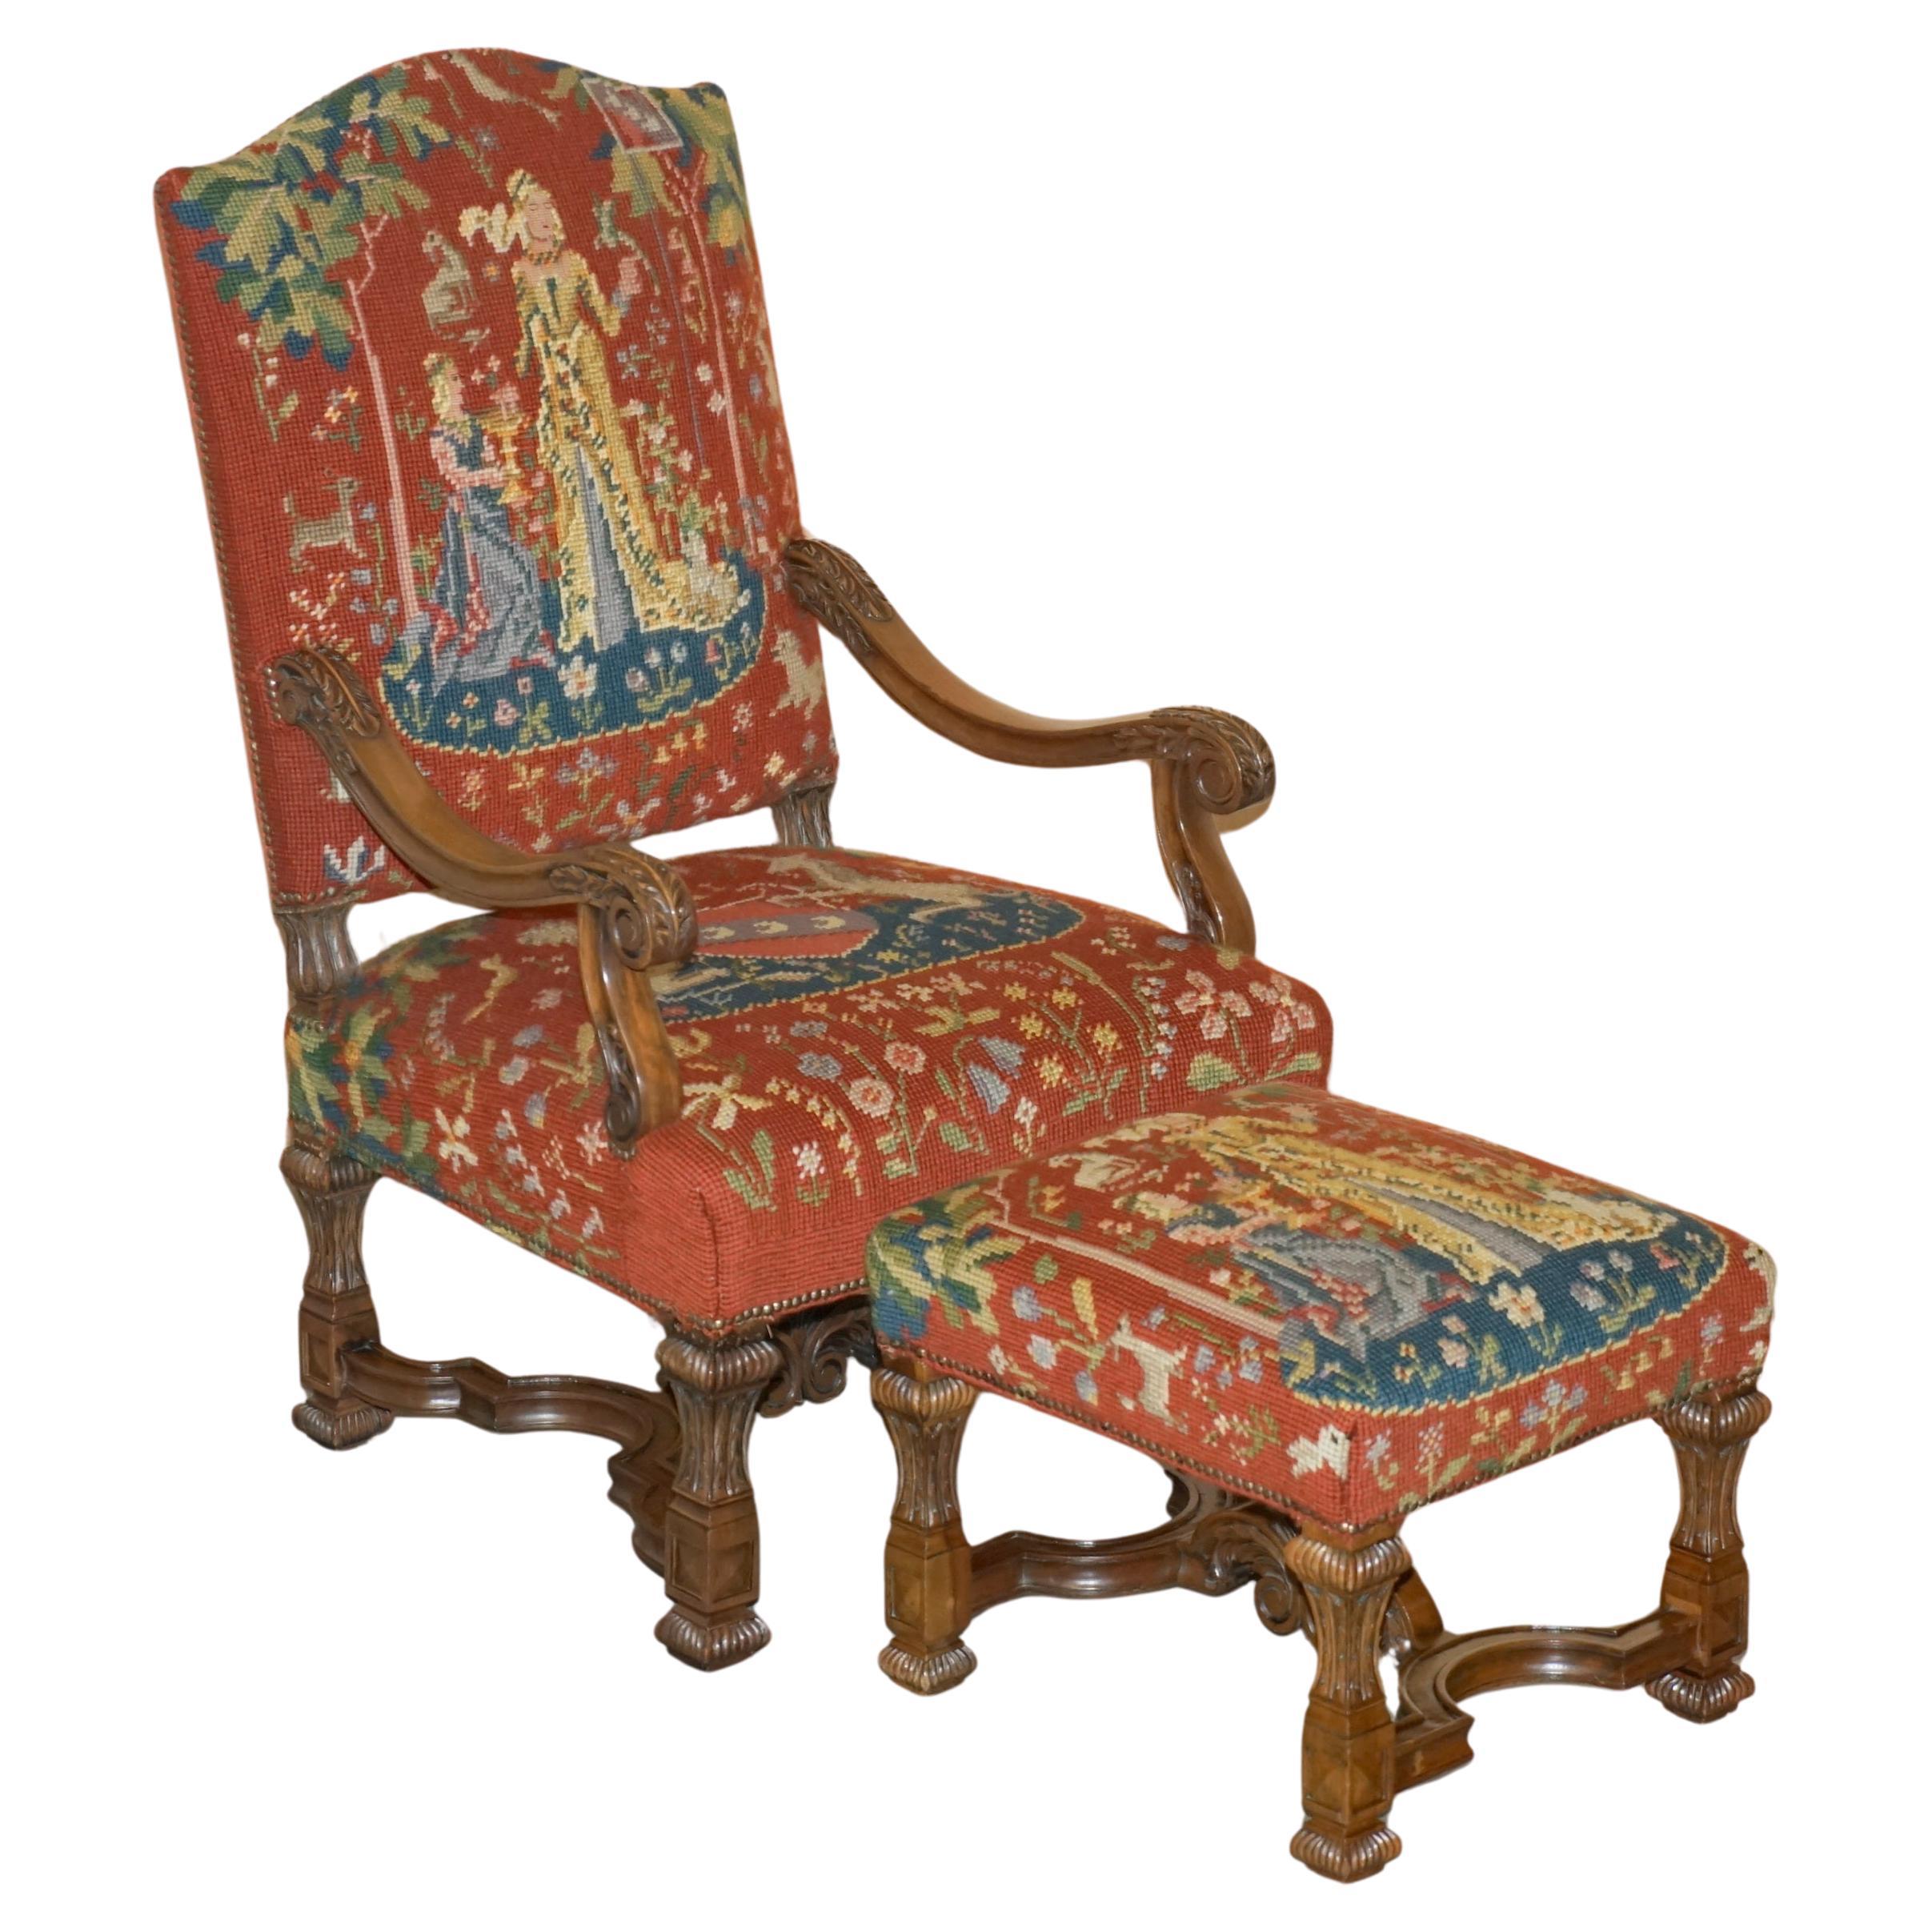 CARVED THRONE ARMCHAIR & FOOTSTOOL EMBROIDERED ARMORIAL COAT OF ARMS FABRiC